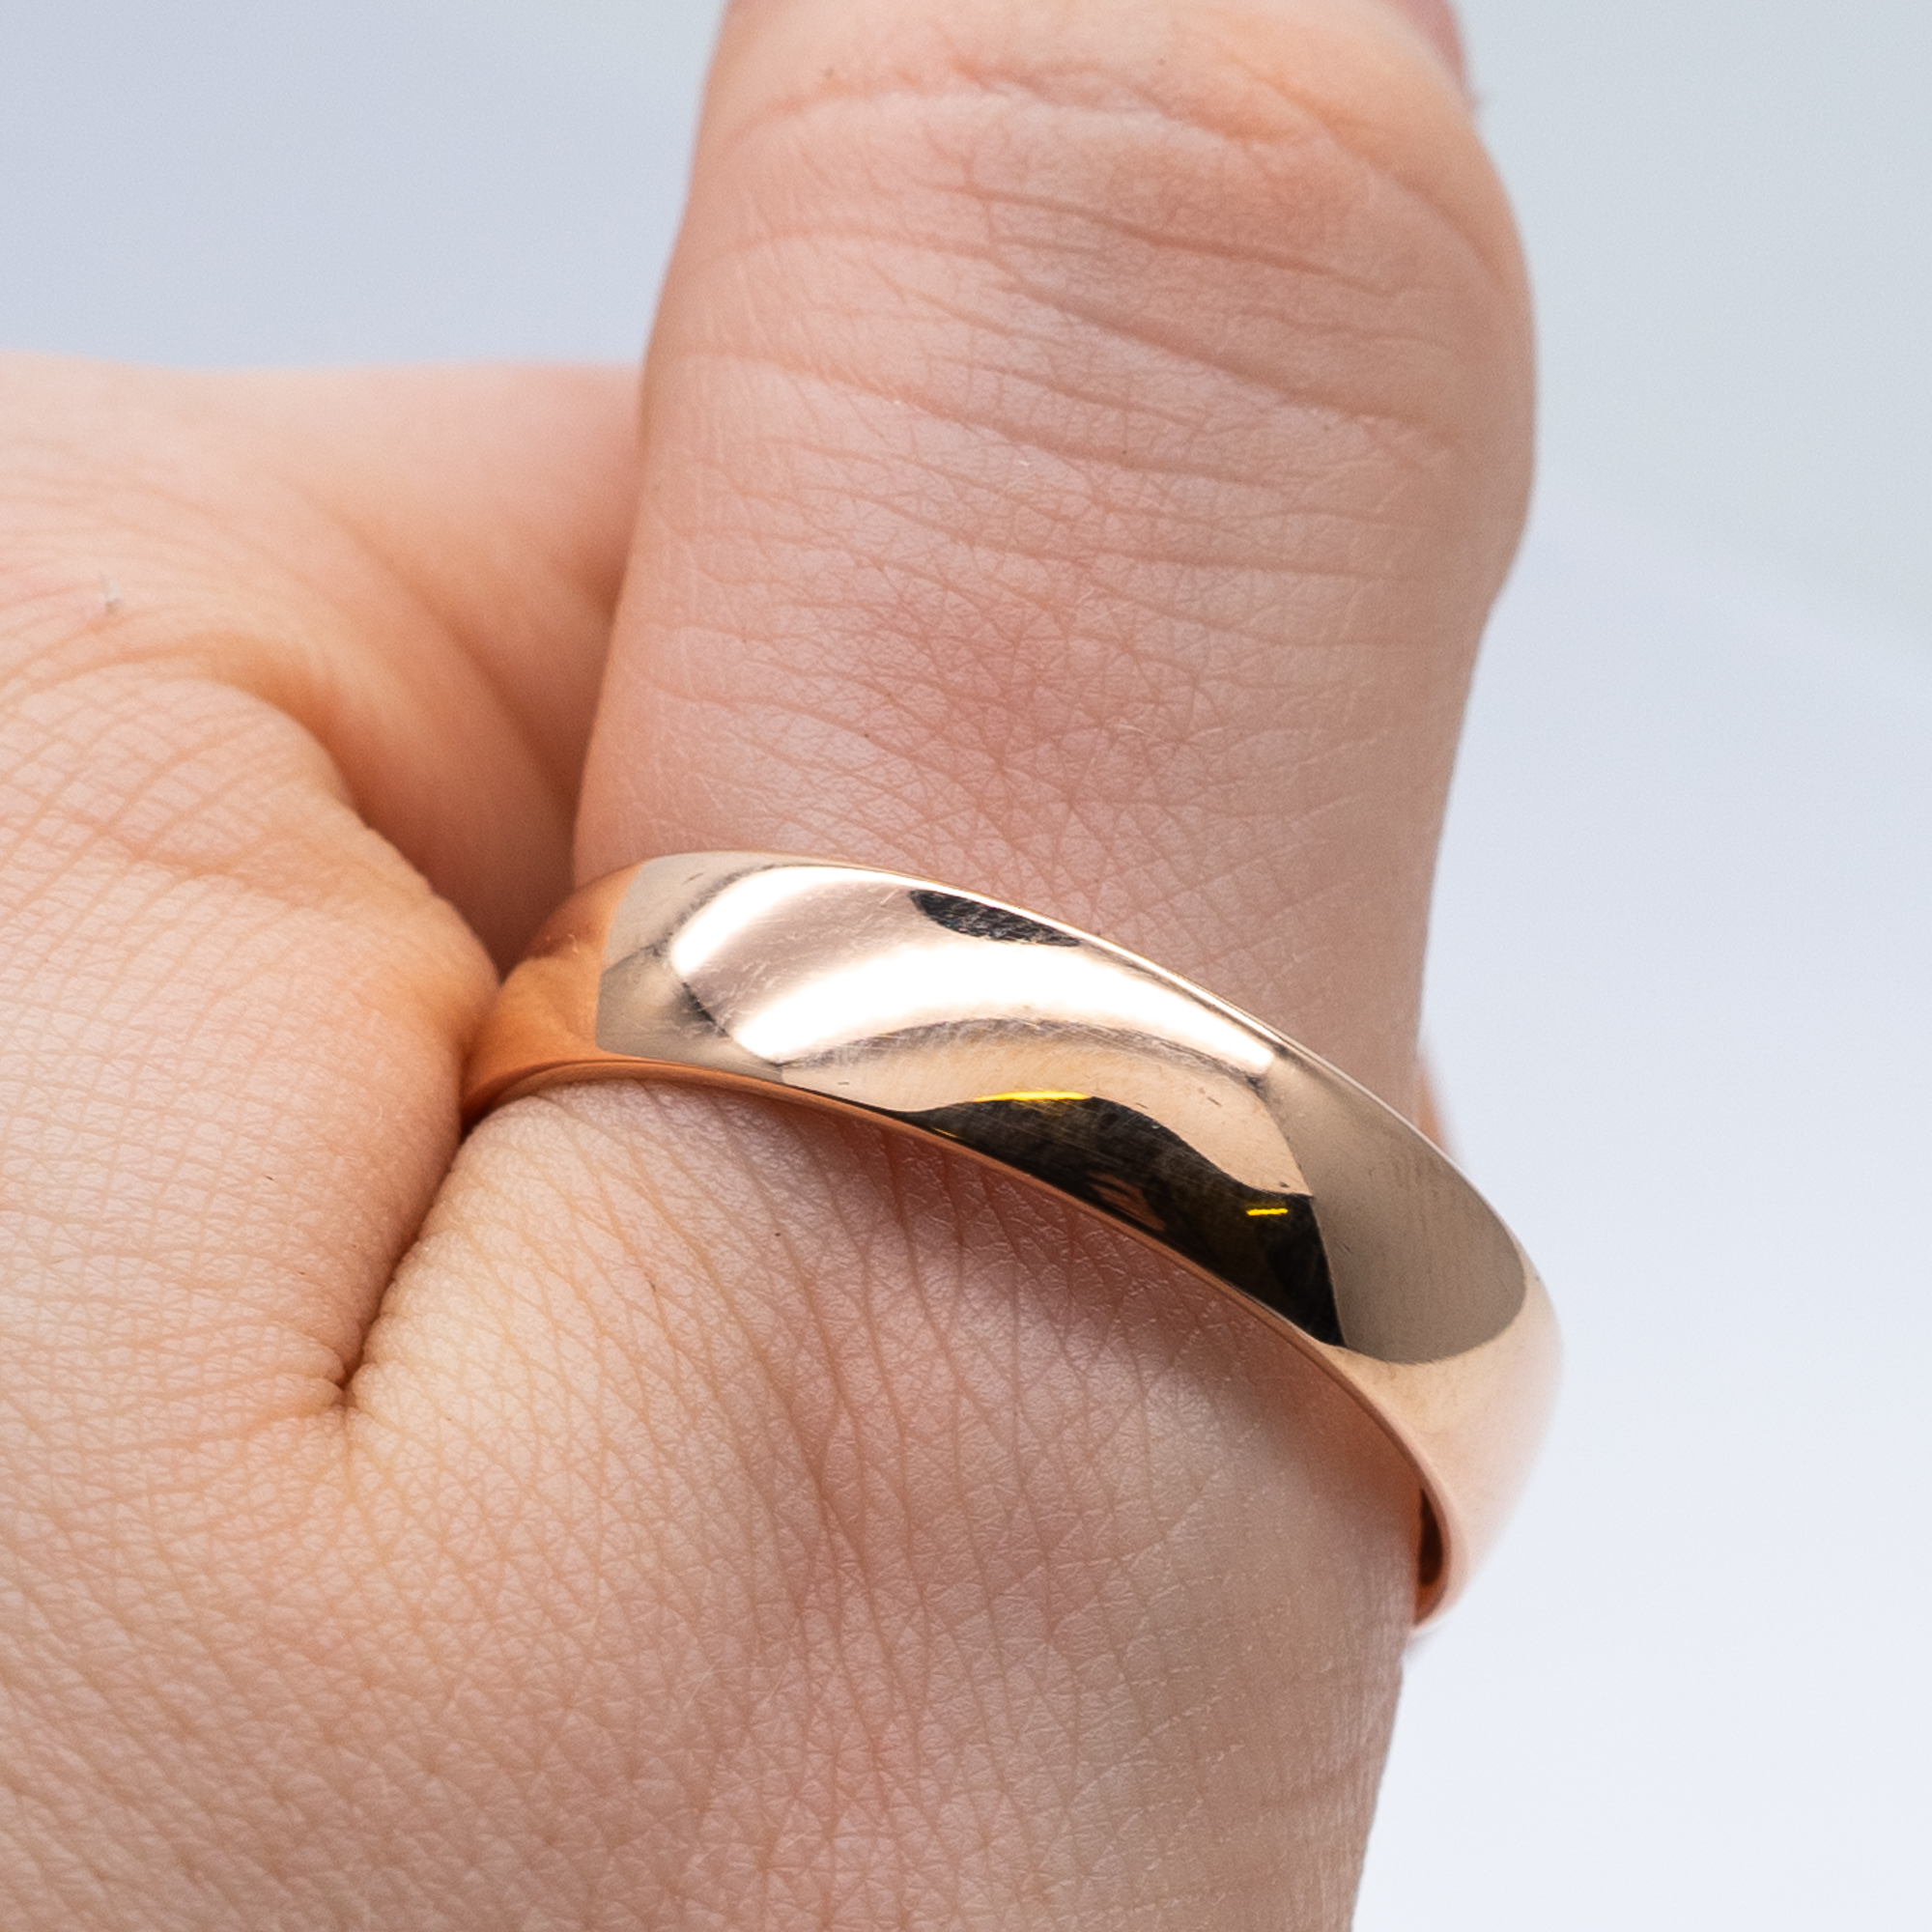 A D shaped 9ct rose gold wedding band - Image 3 of 3